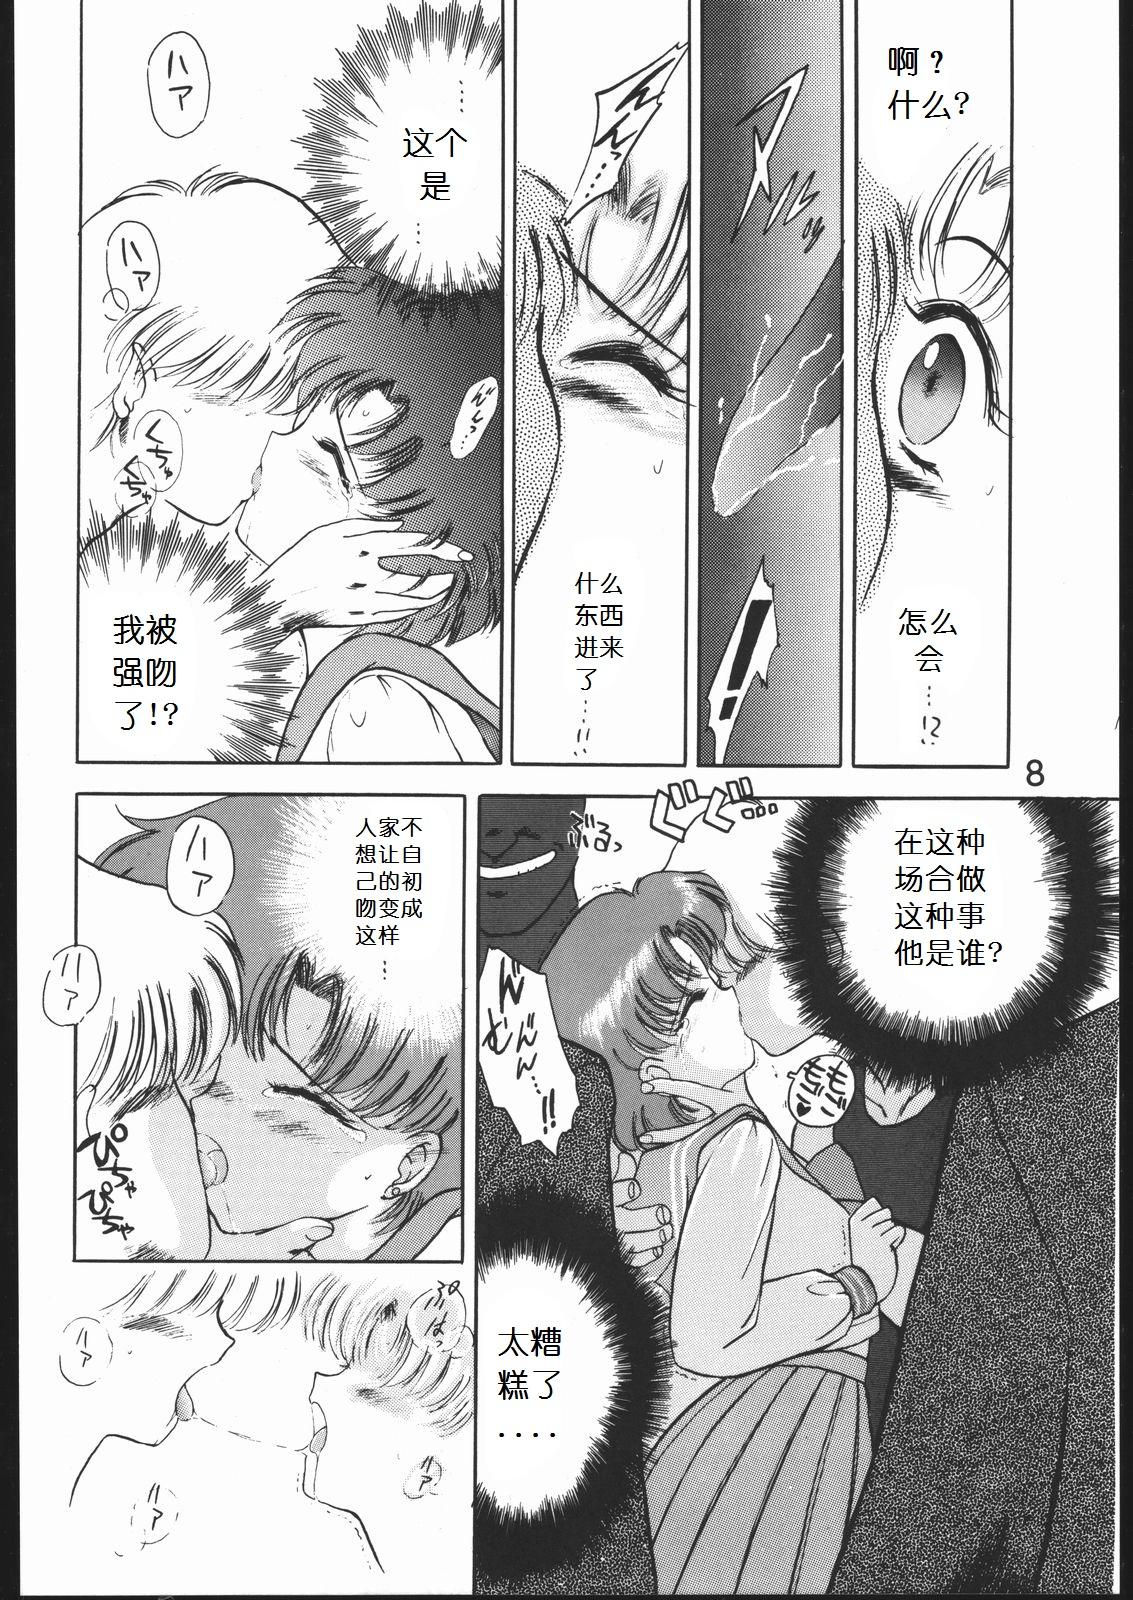 Strap On Submission Mercury Plus - Sailor moon Mms - Page 7